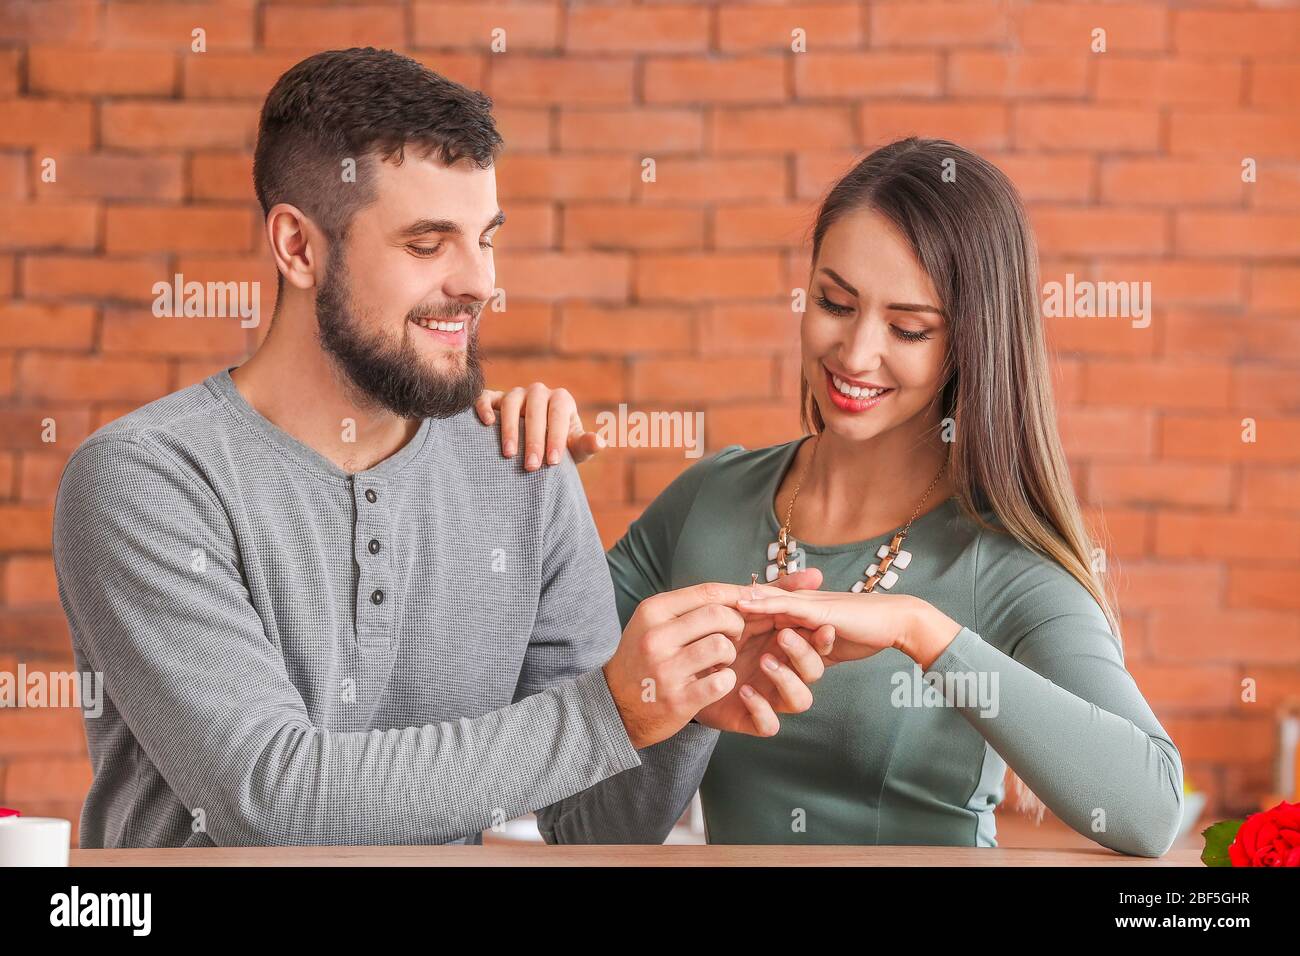 Young man putting ring on finger of his fiancee after marriage proposal at home Stock Photo